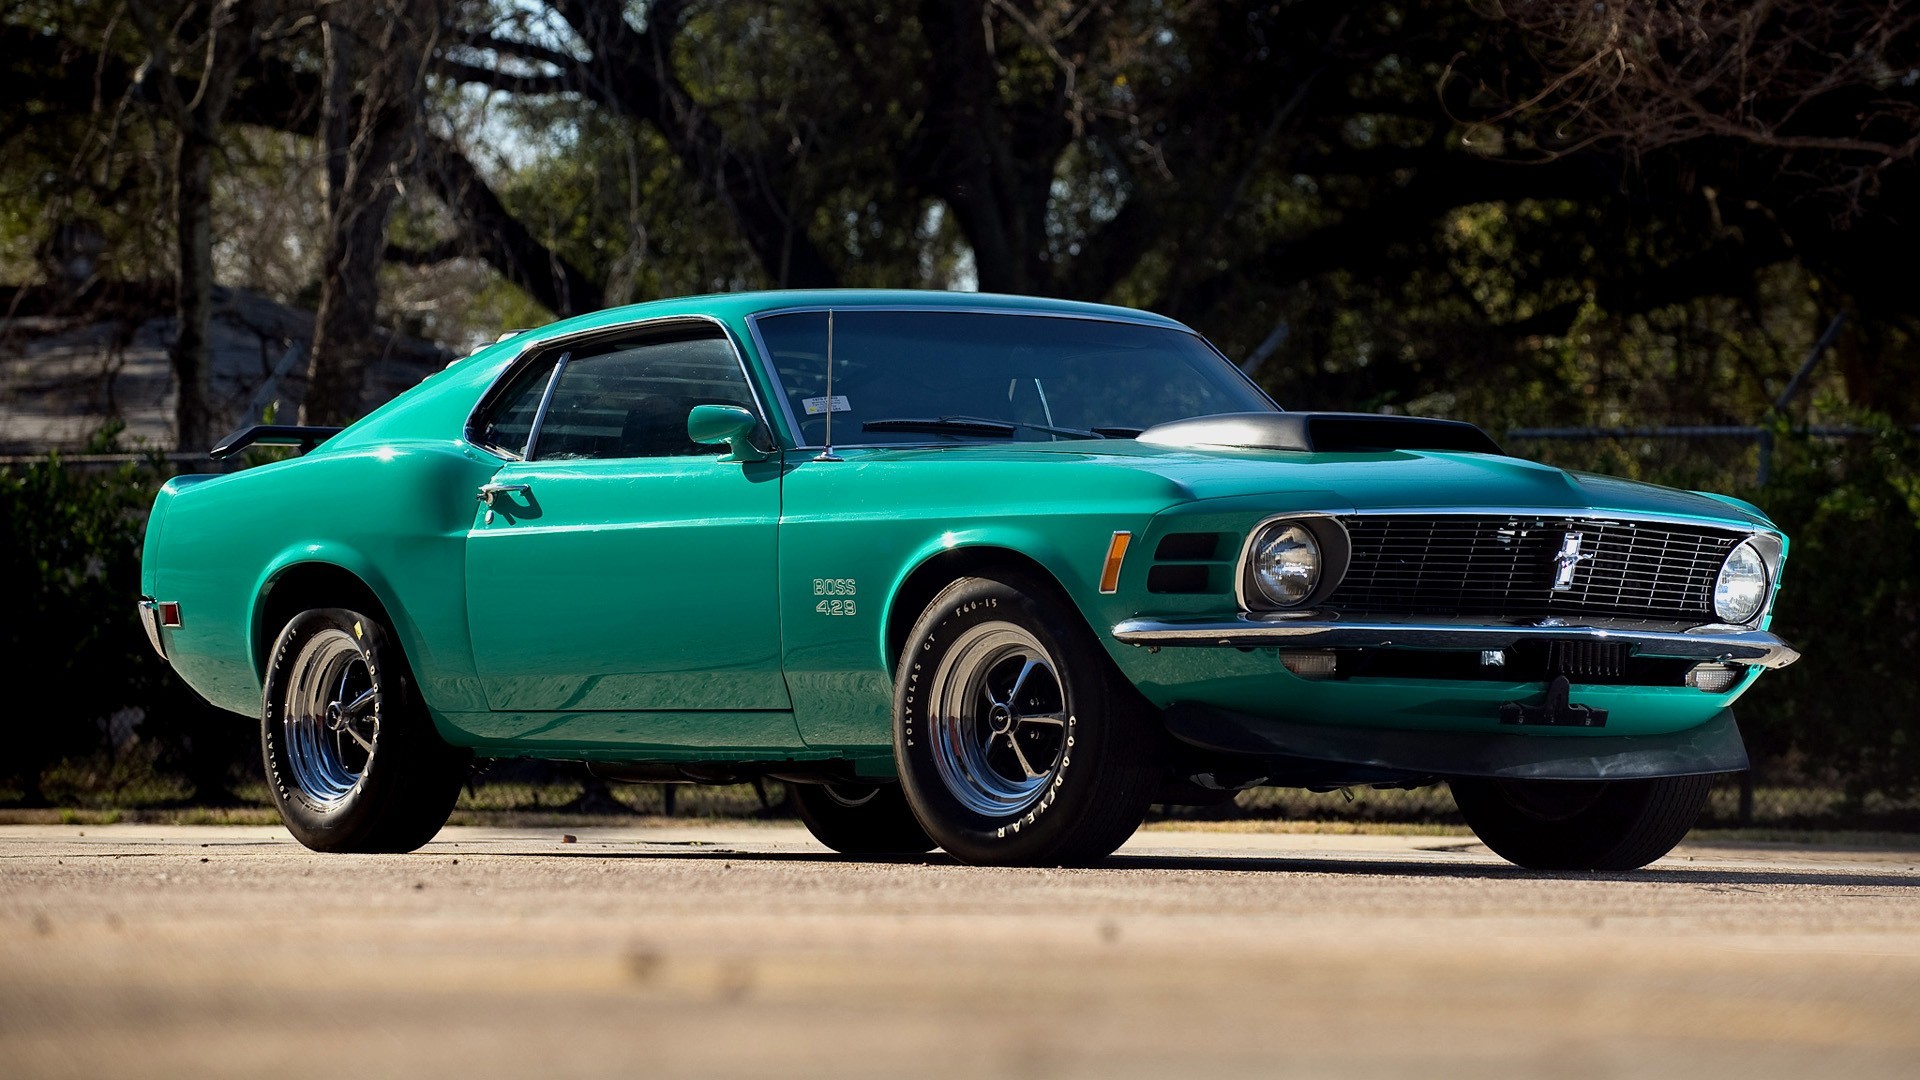 Classic Muscle Cars Wallpaper (70+ images) Muscle Car Wallpaper 1920x1080